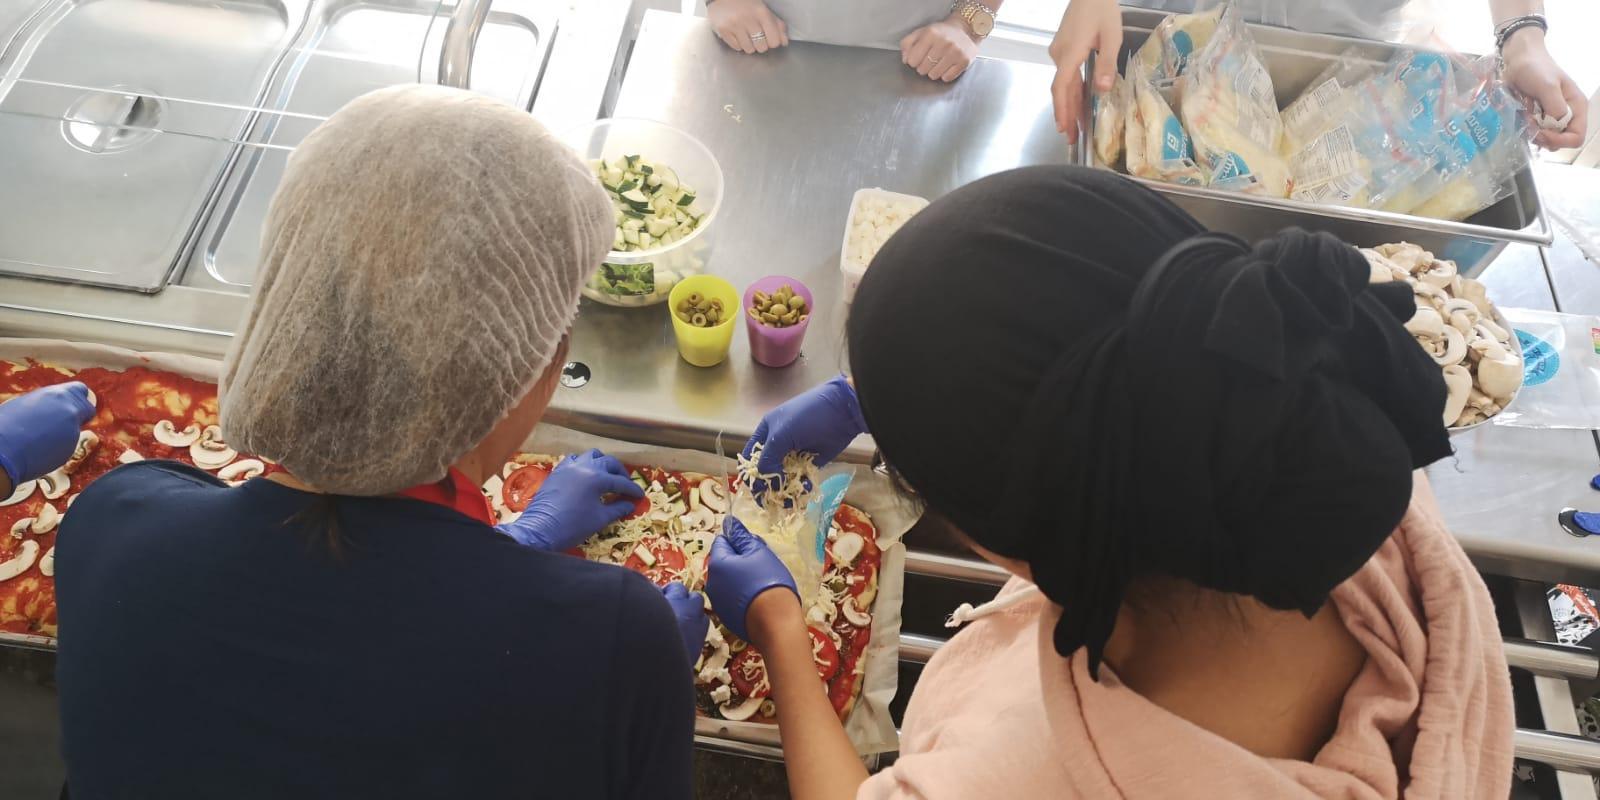 Pizza-making with the women at the Jette centre